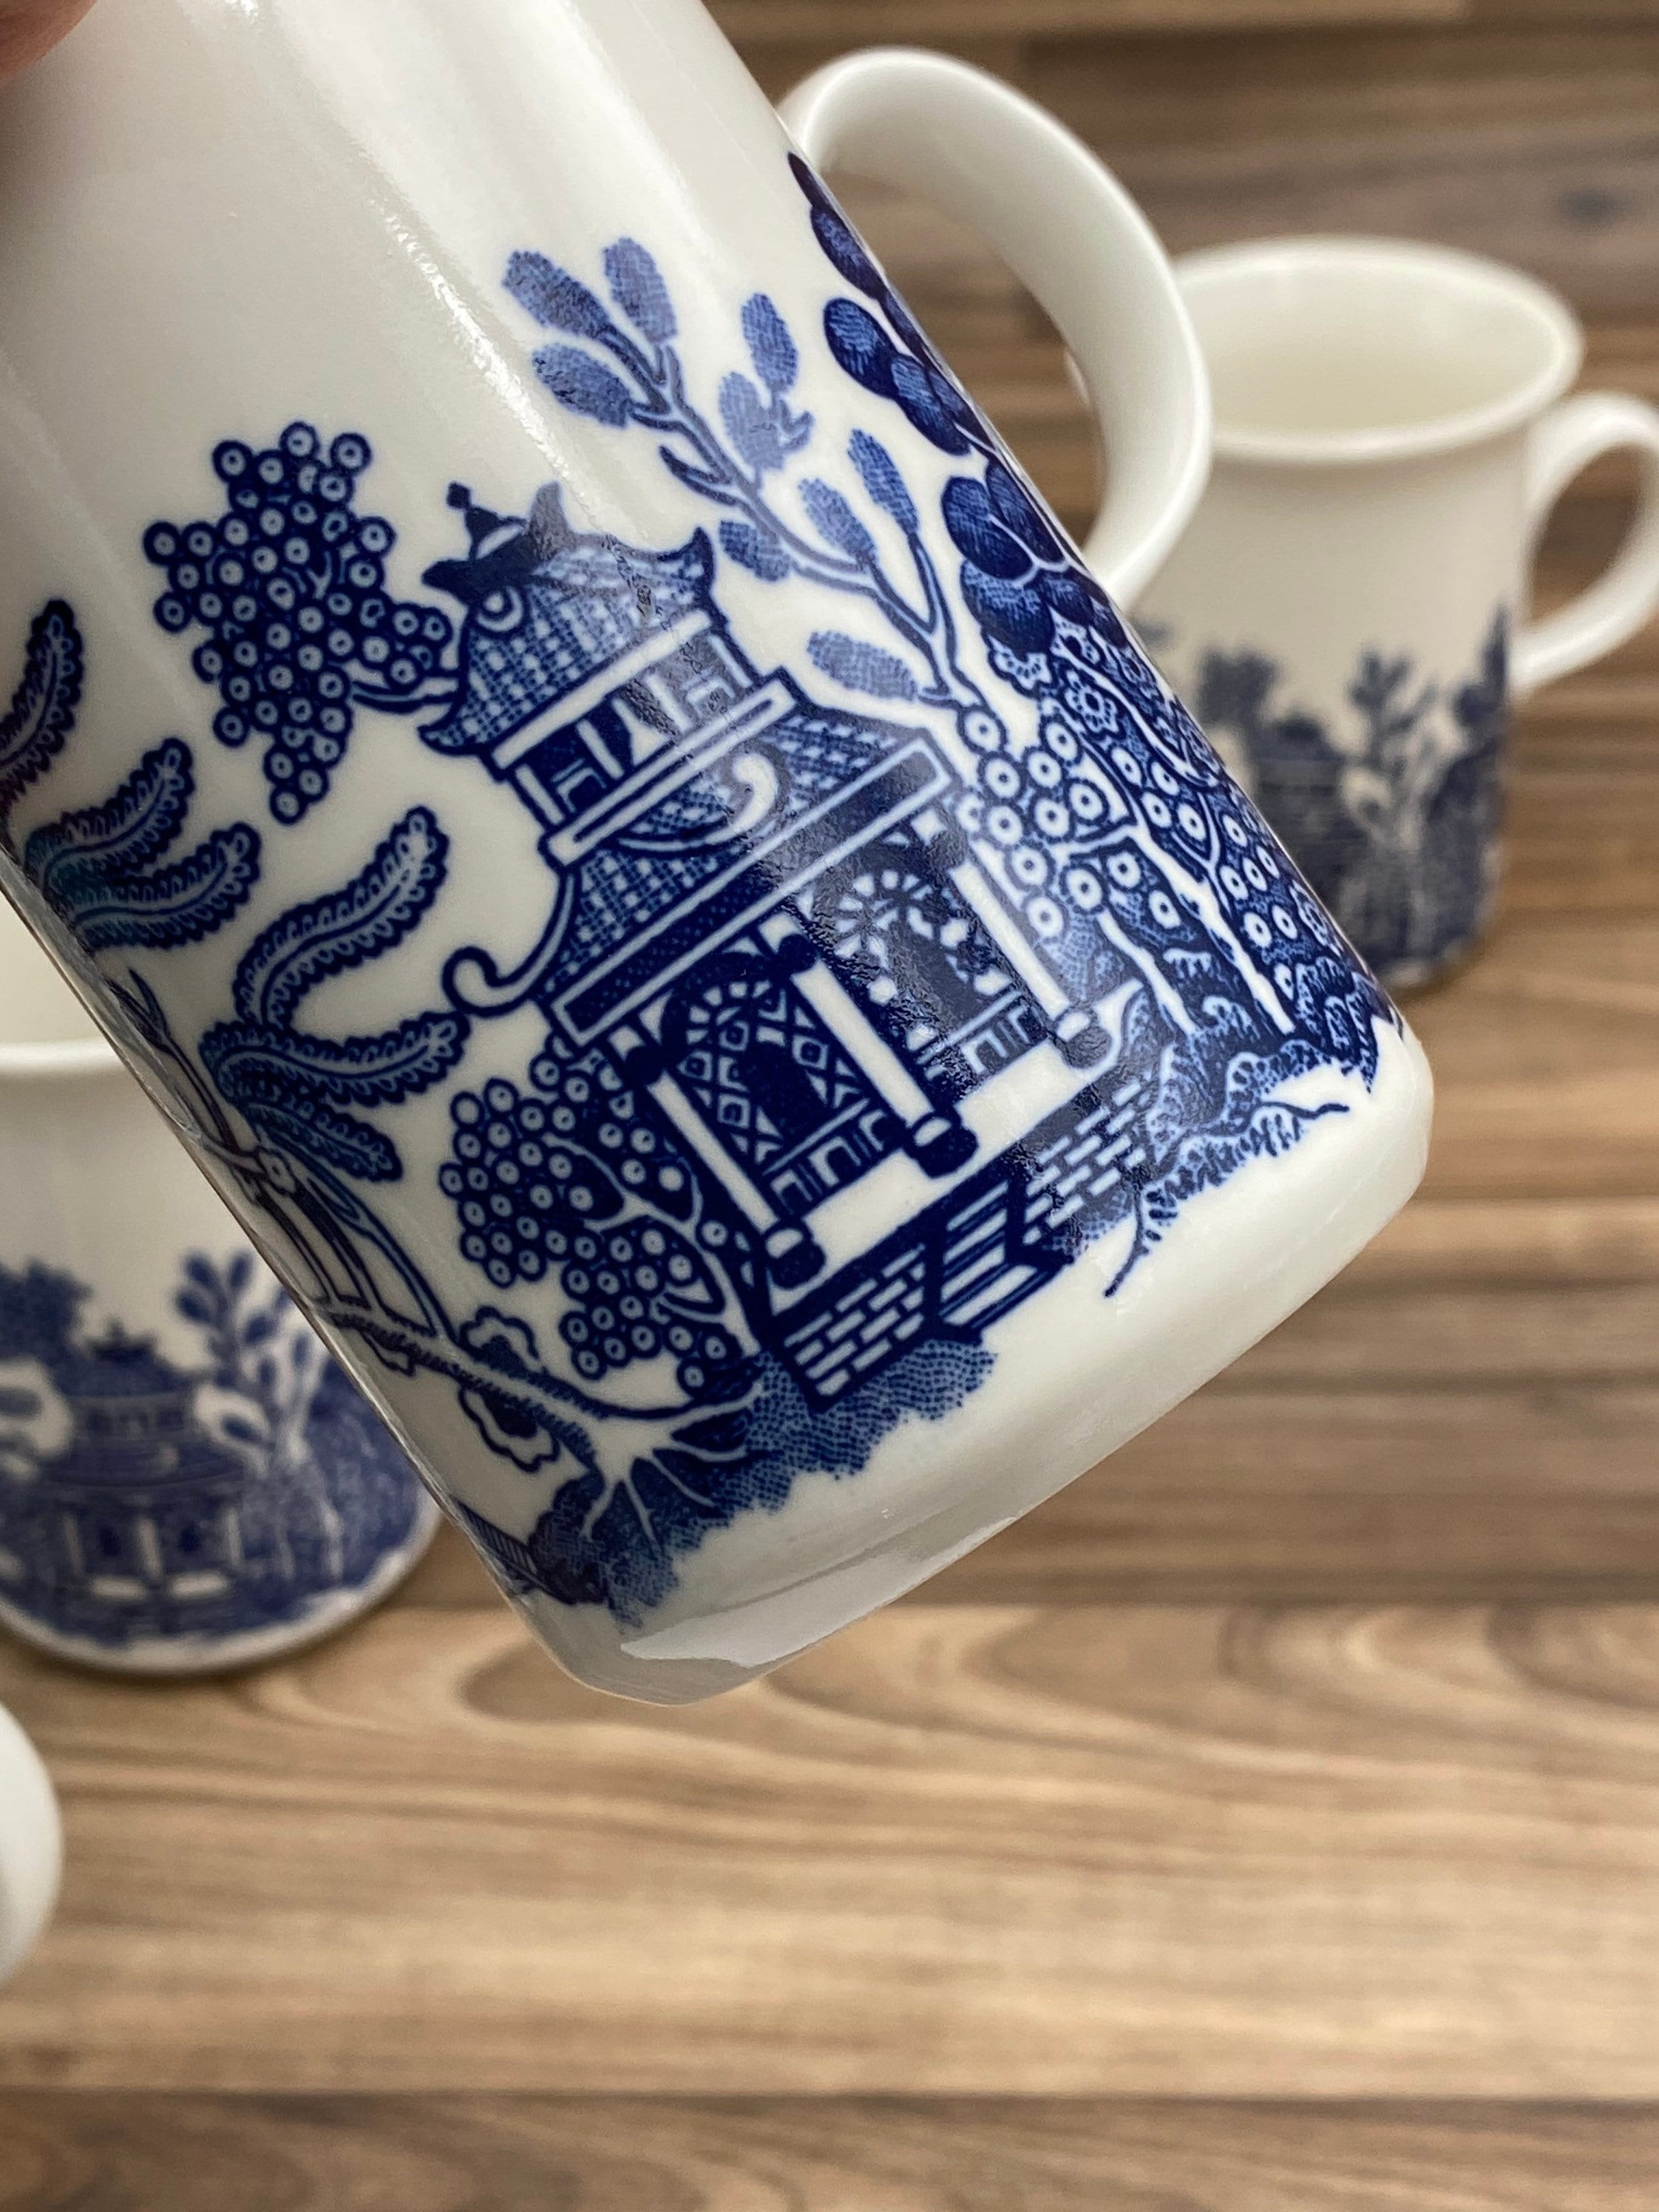 Blue Willow Dishes, Delft Blue, Porcelain Chinaware, Unique Cool Coffee Mugs Calamityware: Things Could Be Worse (Set of 4), Single 12-oz Mug